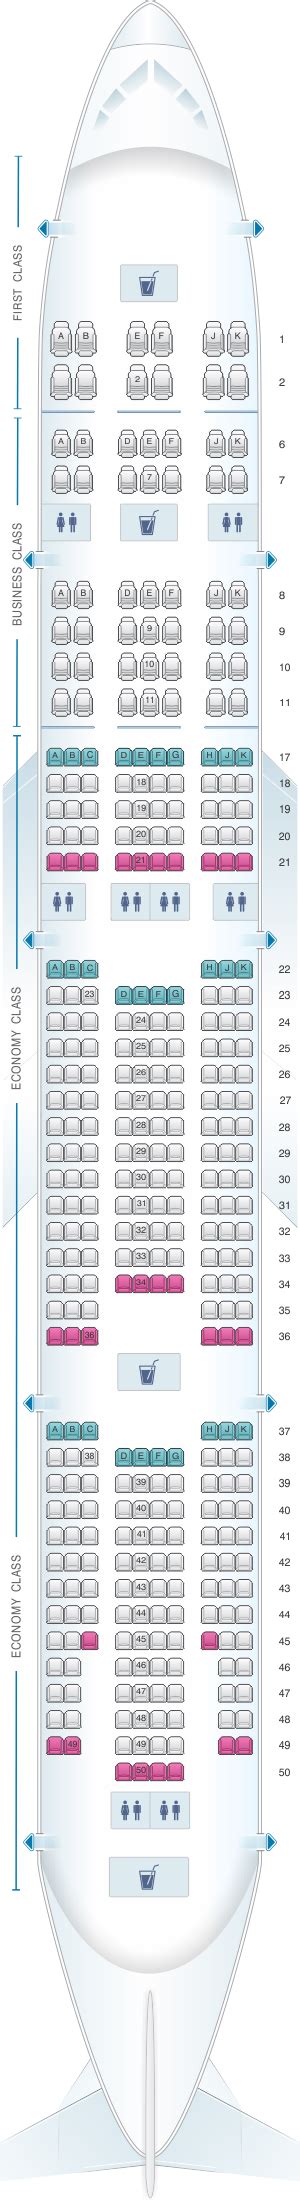 Emirates Boeing Lr Seating Map Two Birds Home